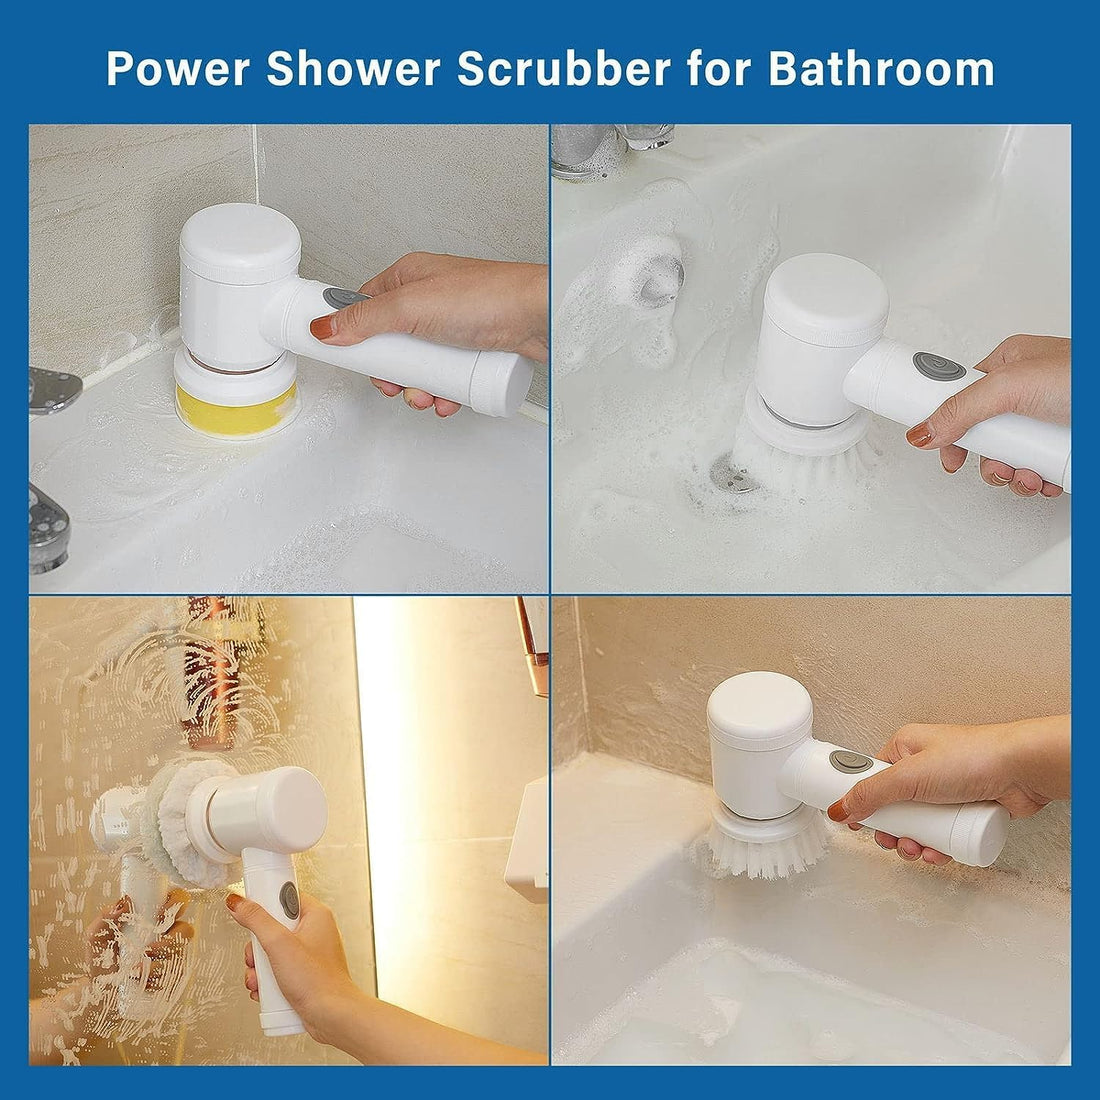 Rechargeable Electric Spin Scrubber - Powerful Cleaning Tools for Bathroom, Kitchen, and More!